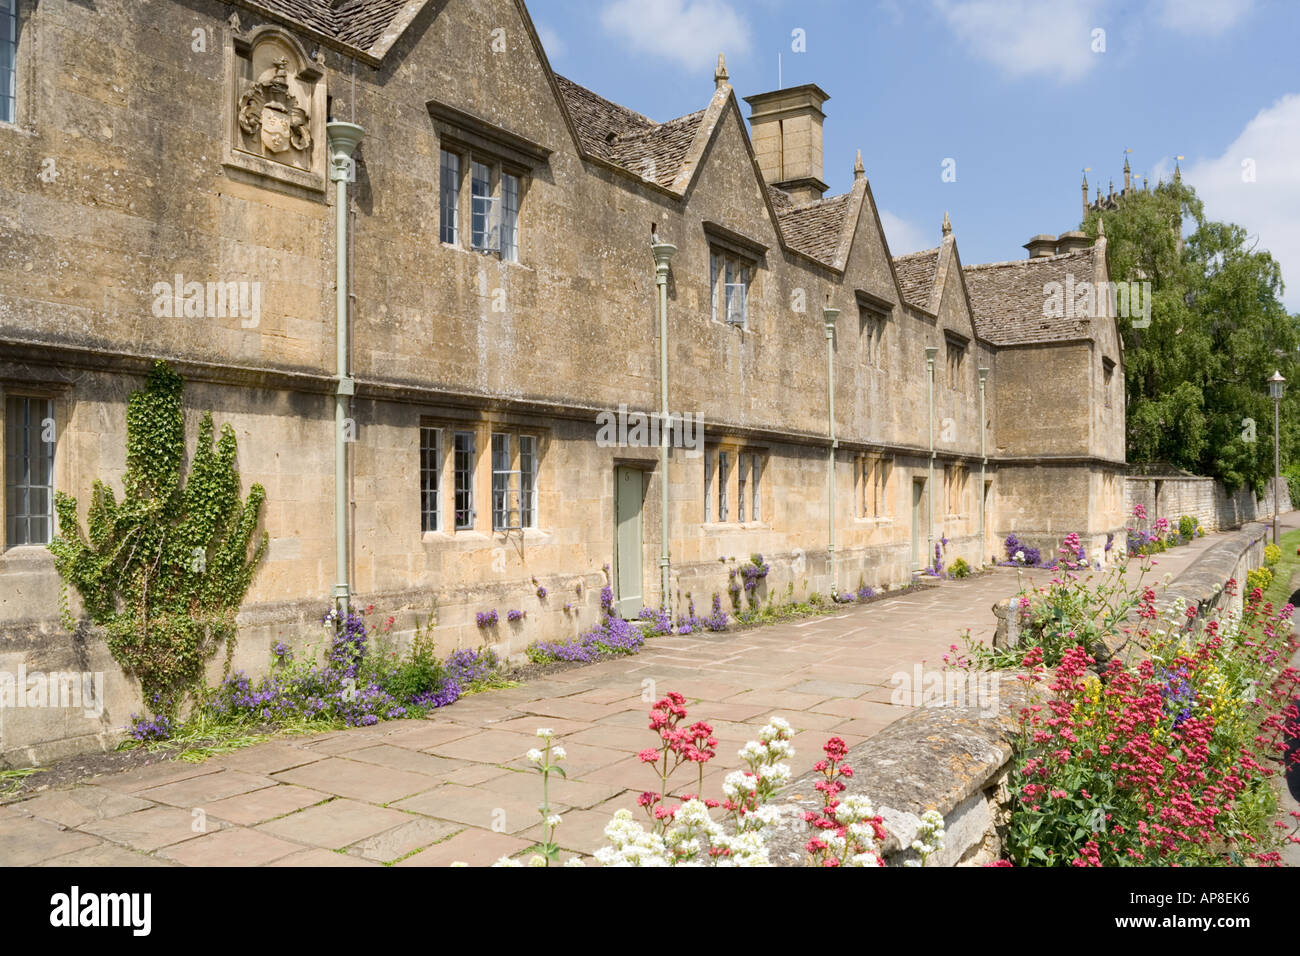 The almshouses built by Sir Baptist Hicks in 1612 in the Cotswold town of Chipping Campden, Gloucestershire Stock Photo